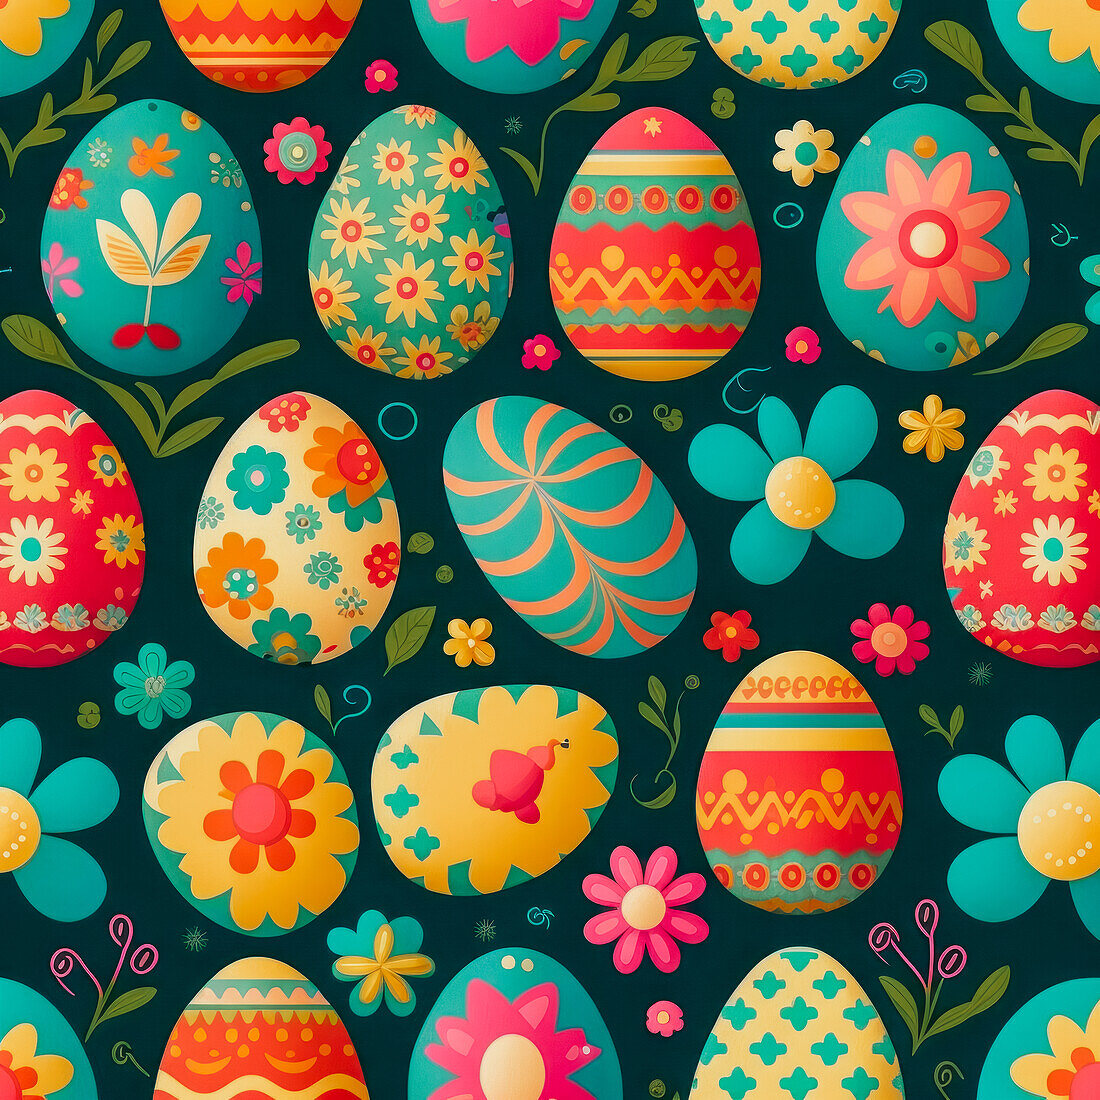 Abstract background of various colorful bright Easter eggs with different ornaments and flowers on dark surface with twigs